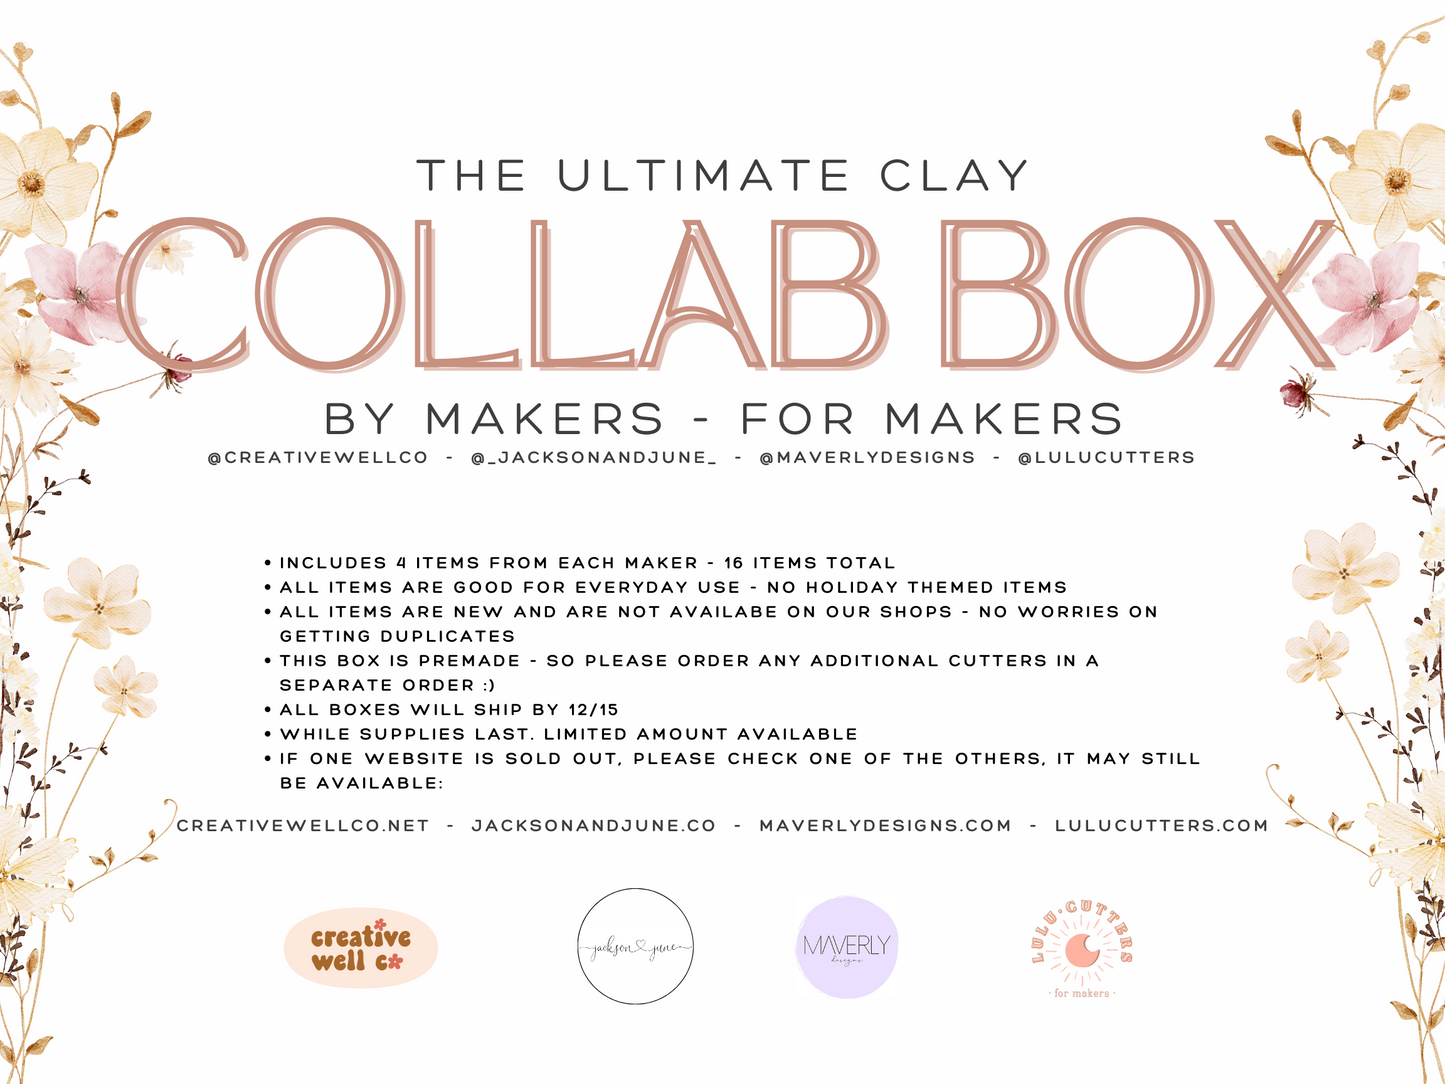 The Ultimate Clay Collab Box - For Makers